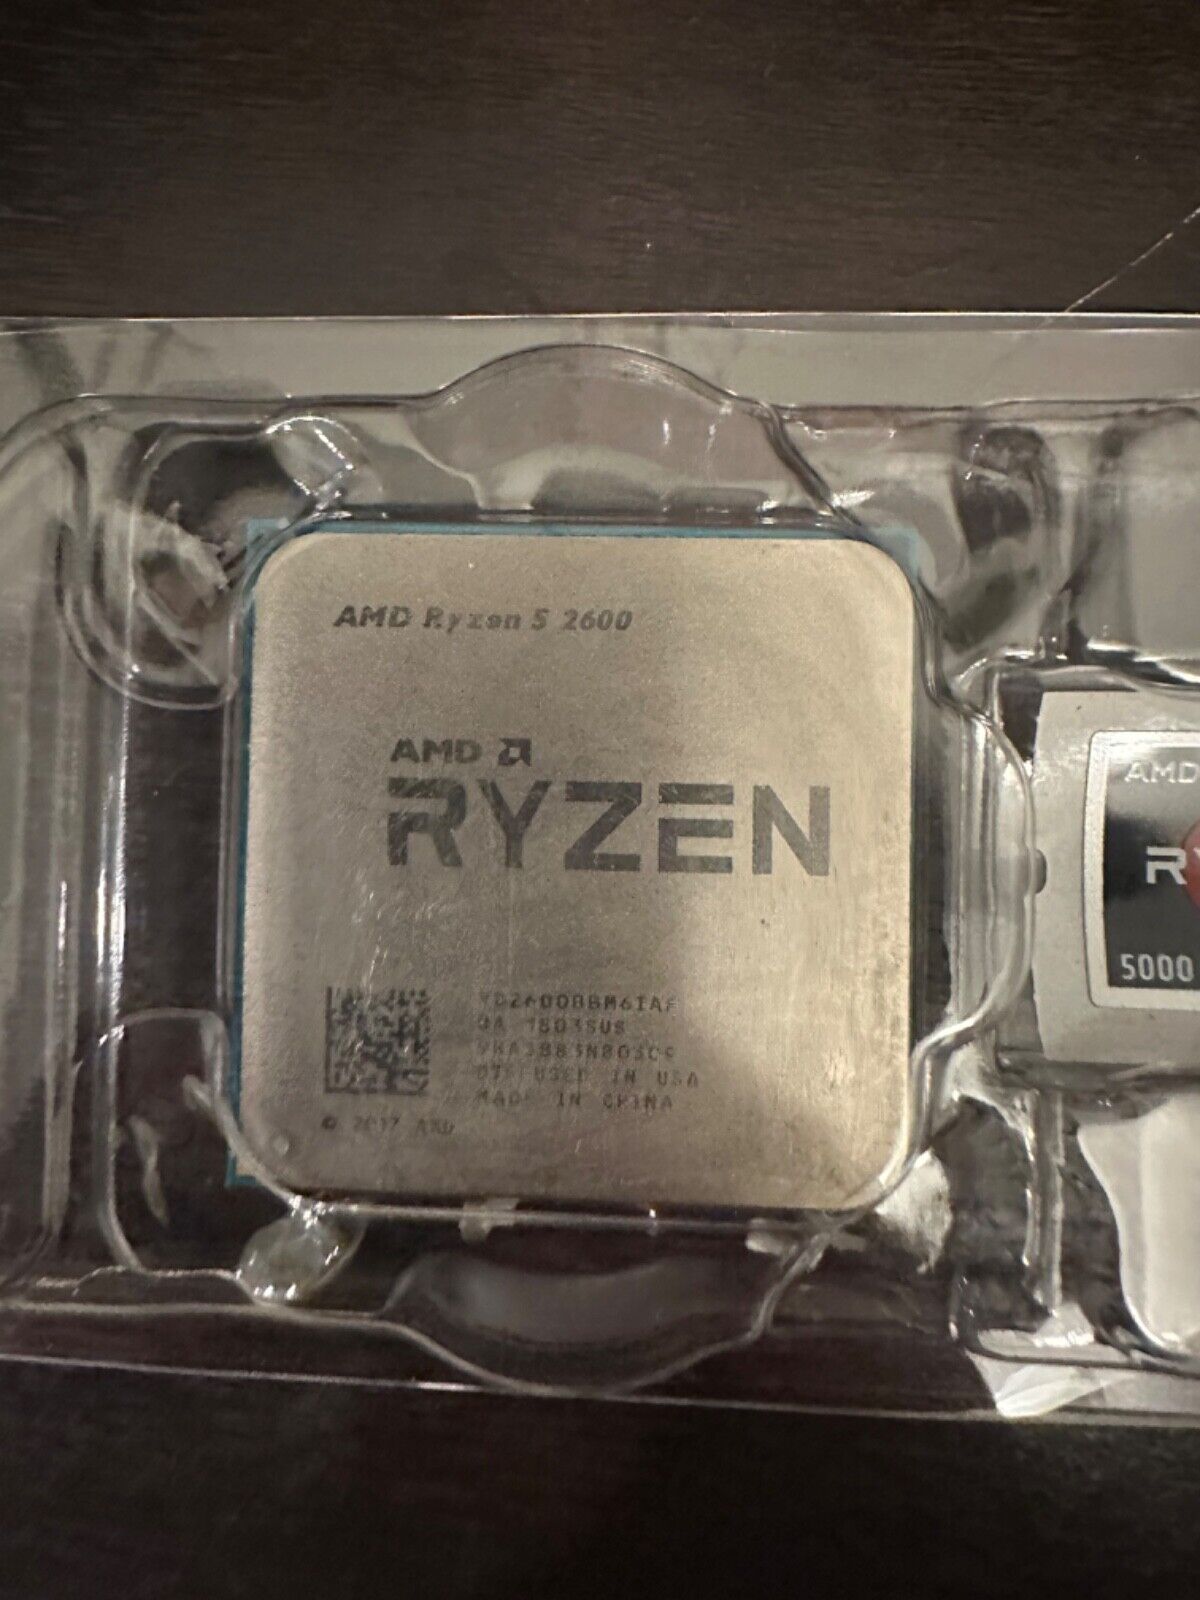 AMD Ryzen 5 2600 Processor (3.9GHz, 6 Cores, AM4) with Wraith Stealth Cooler